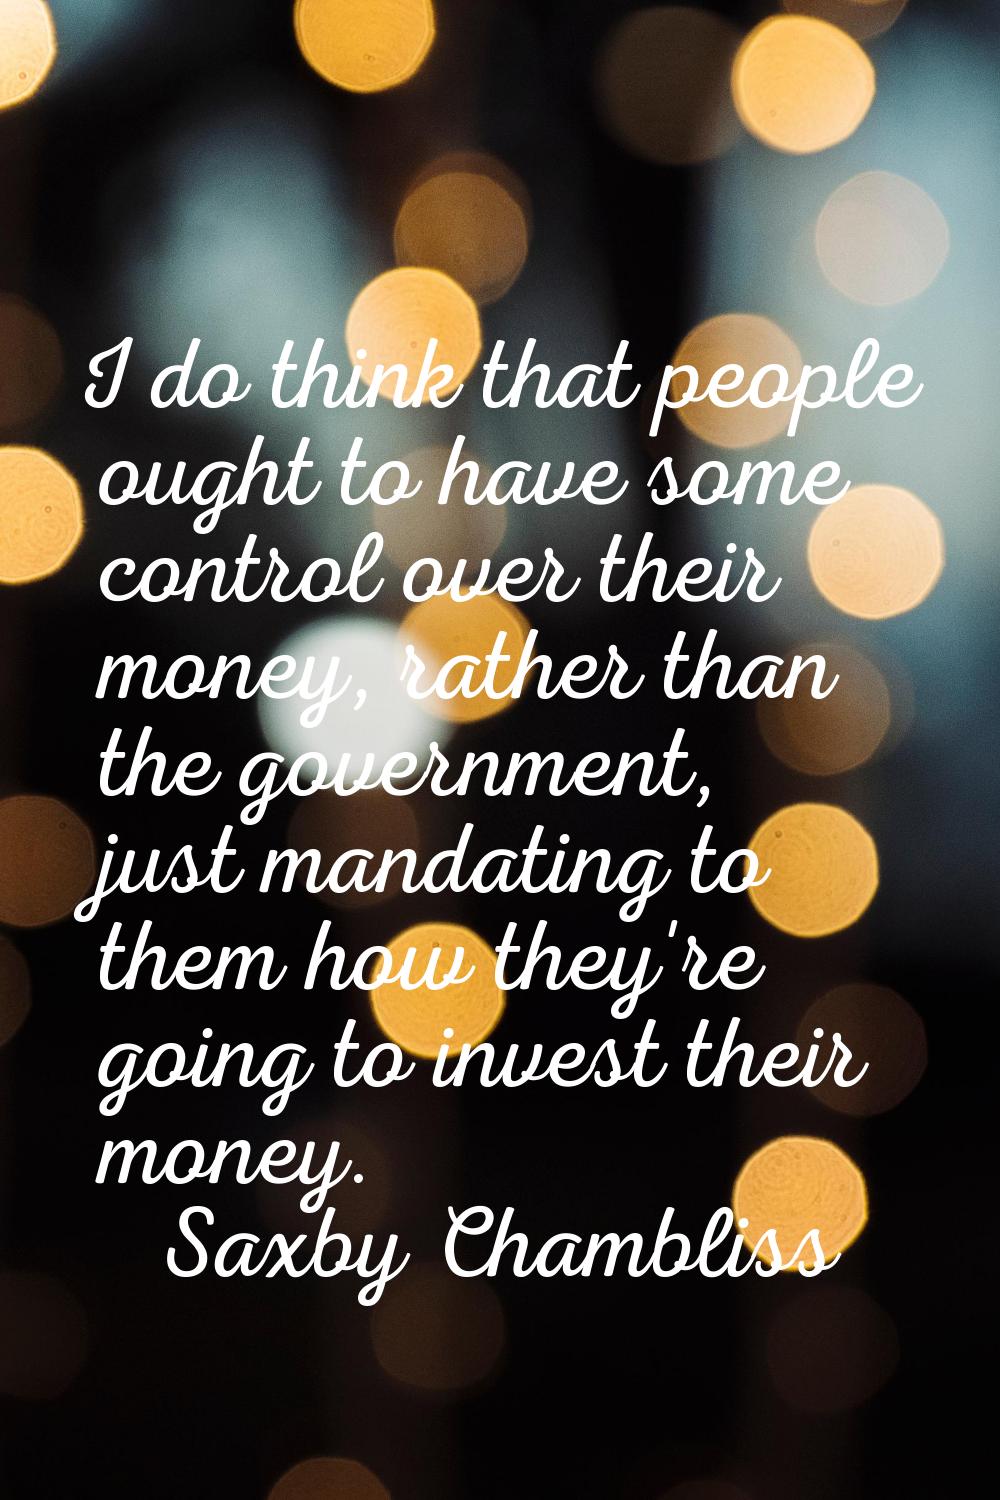 I do think that people ought to have some control over their money, rather than the government, jus